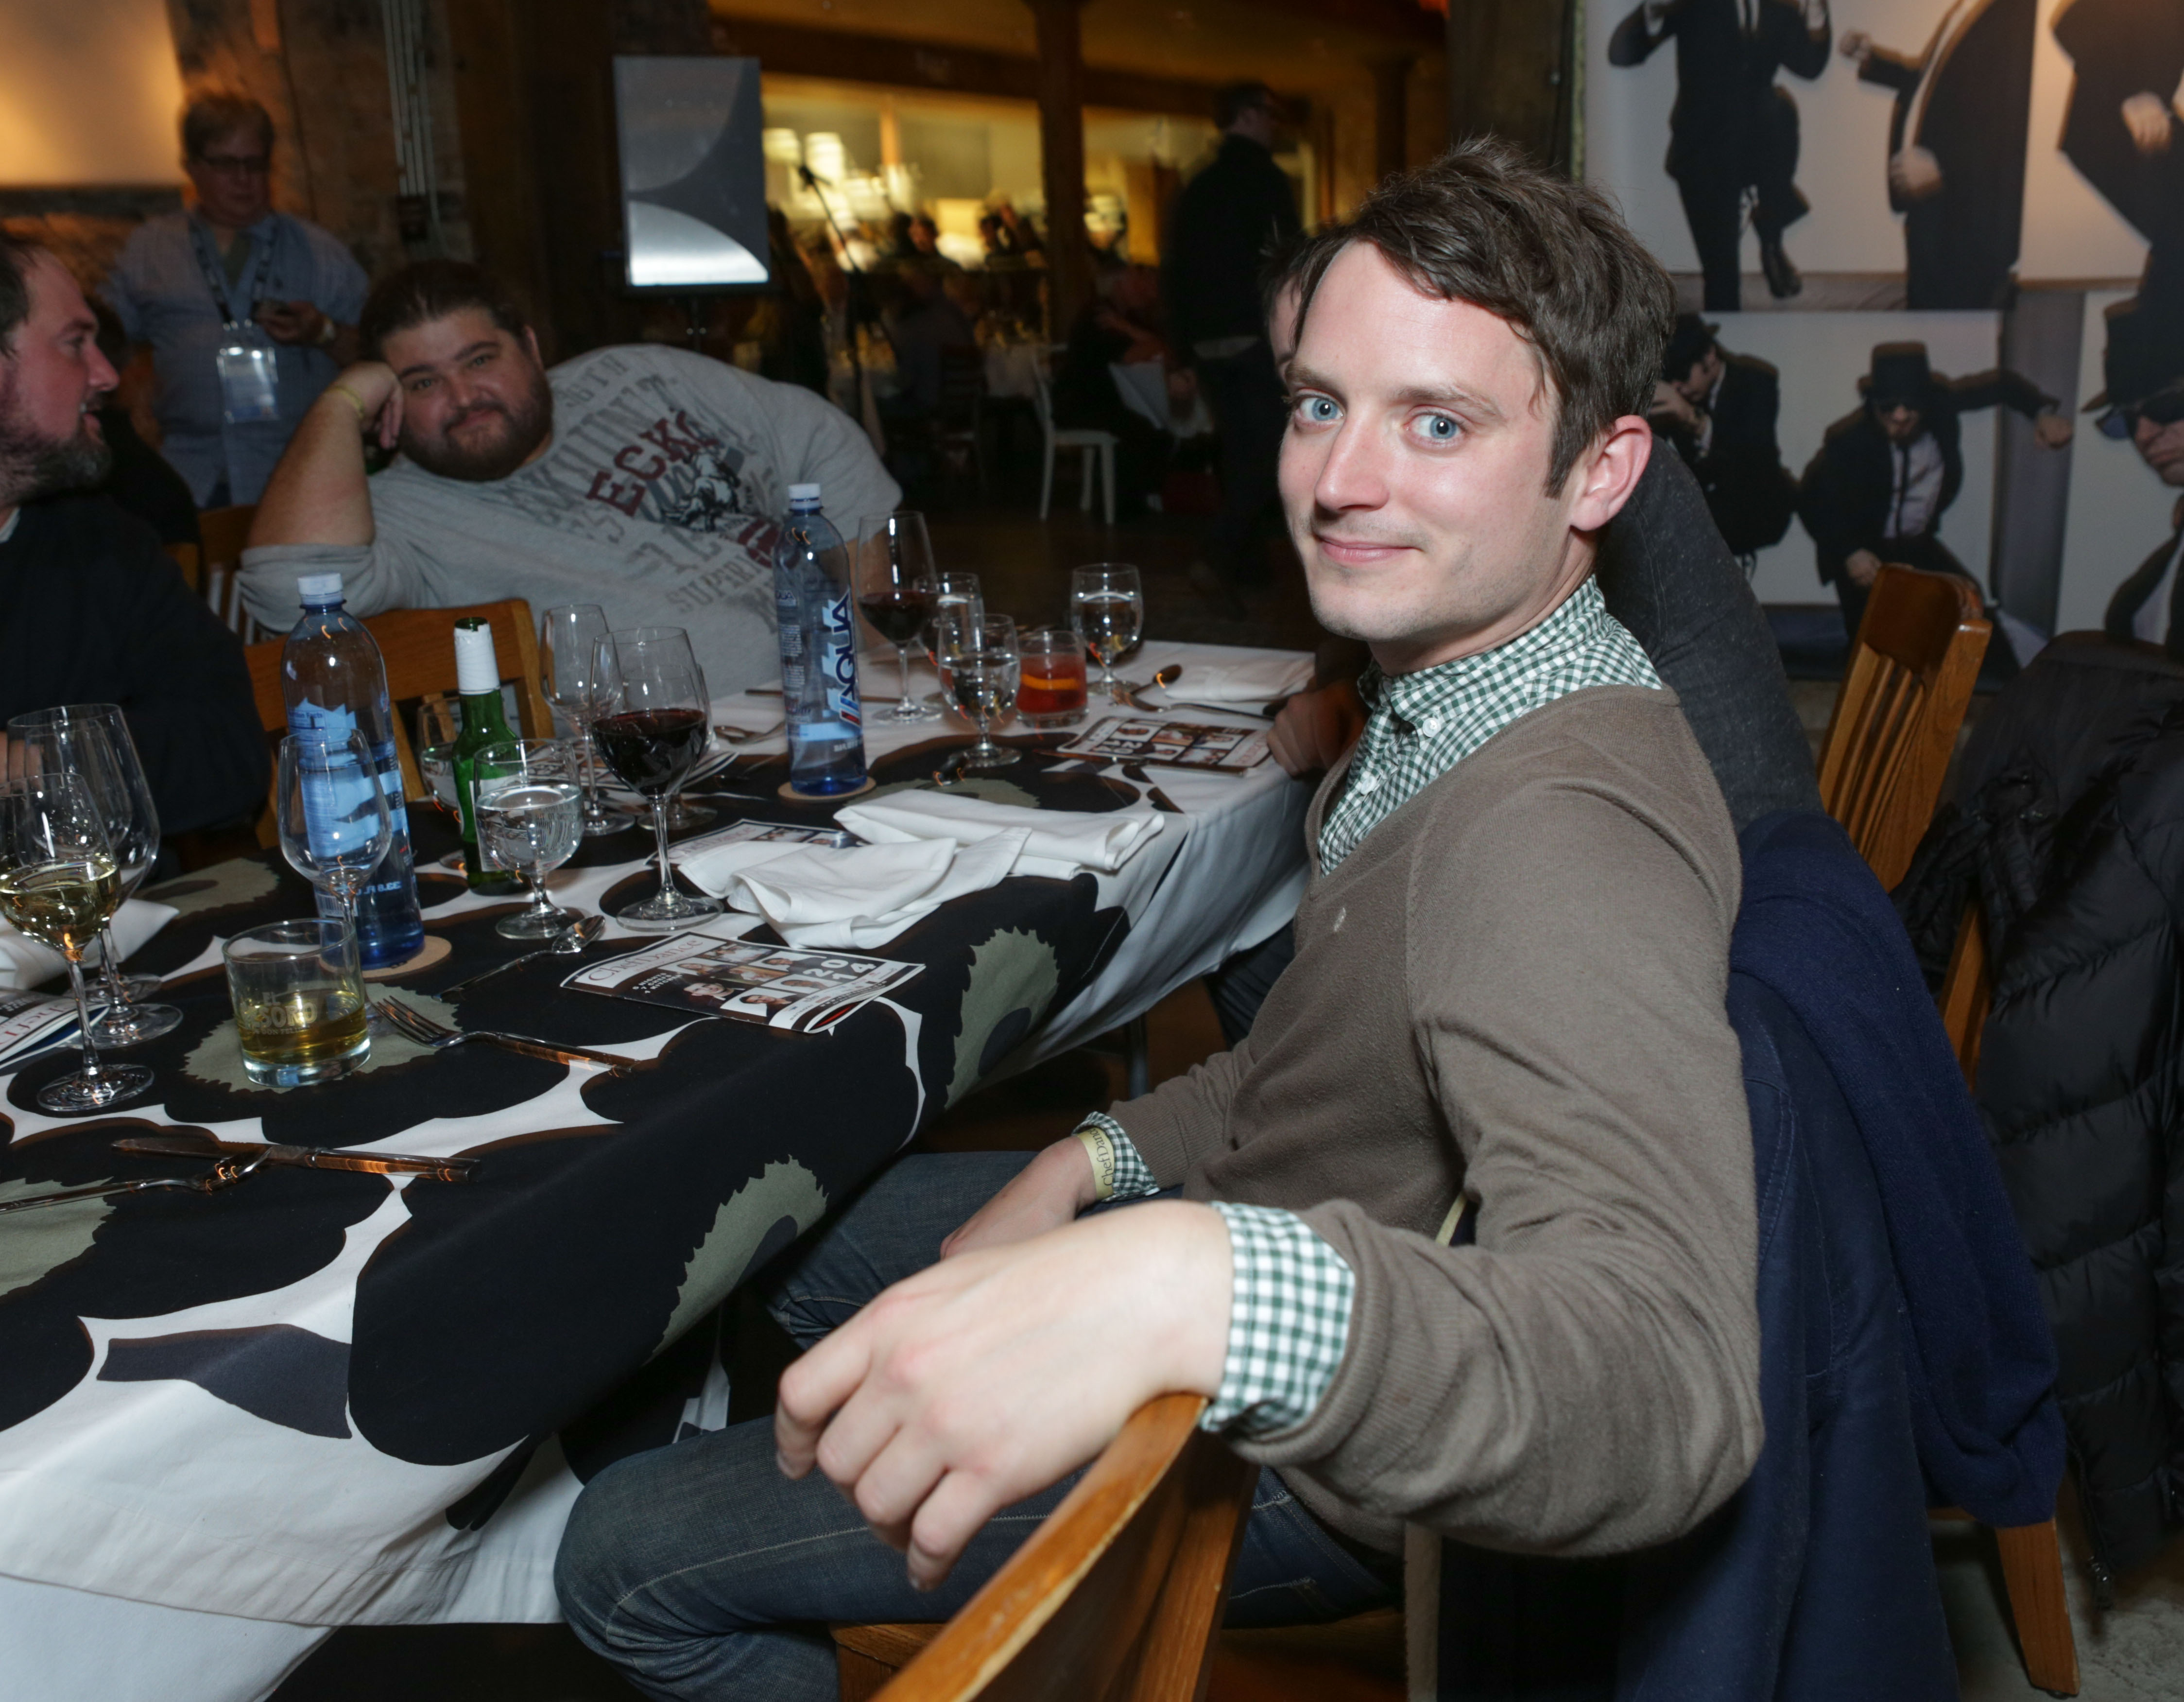 Actors Jorge Garcia and Elijah Wood attend ChefDance presented by Bravo's Top Chef Sponsored by SUJA Juices, El Tesoro De Don Filipe Tequila & United Airlines on January 17, 2014 in Park City, Utah.  (Photo by Tiffany Rose/Getty Images for ChefDance)